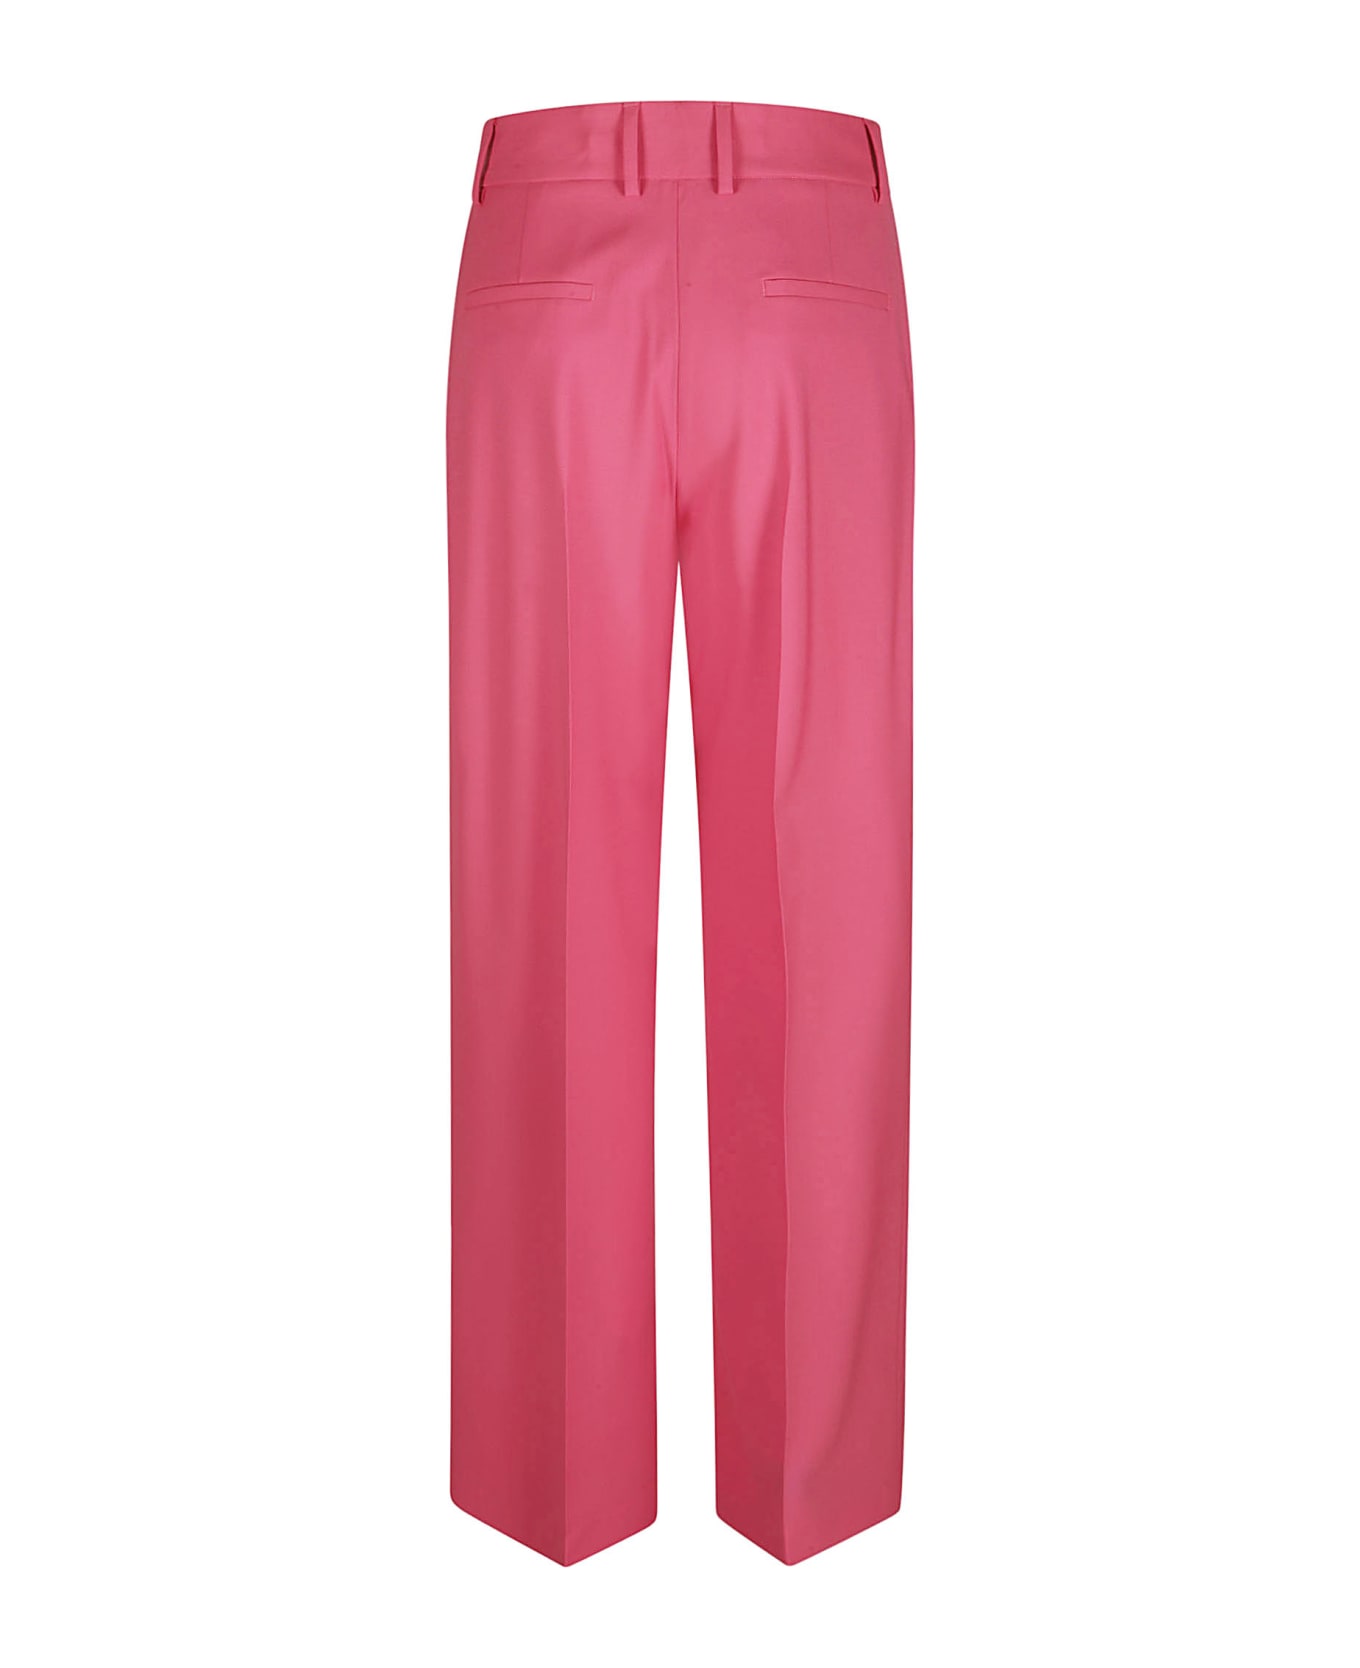 MSGM Concealed Classic Trousers - Pink